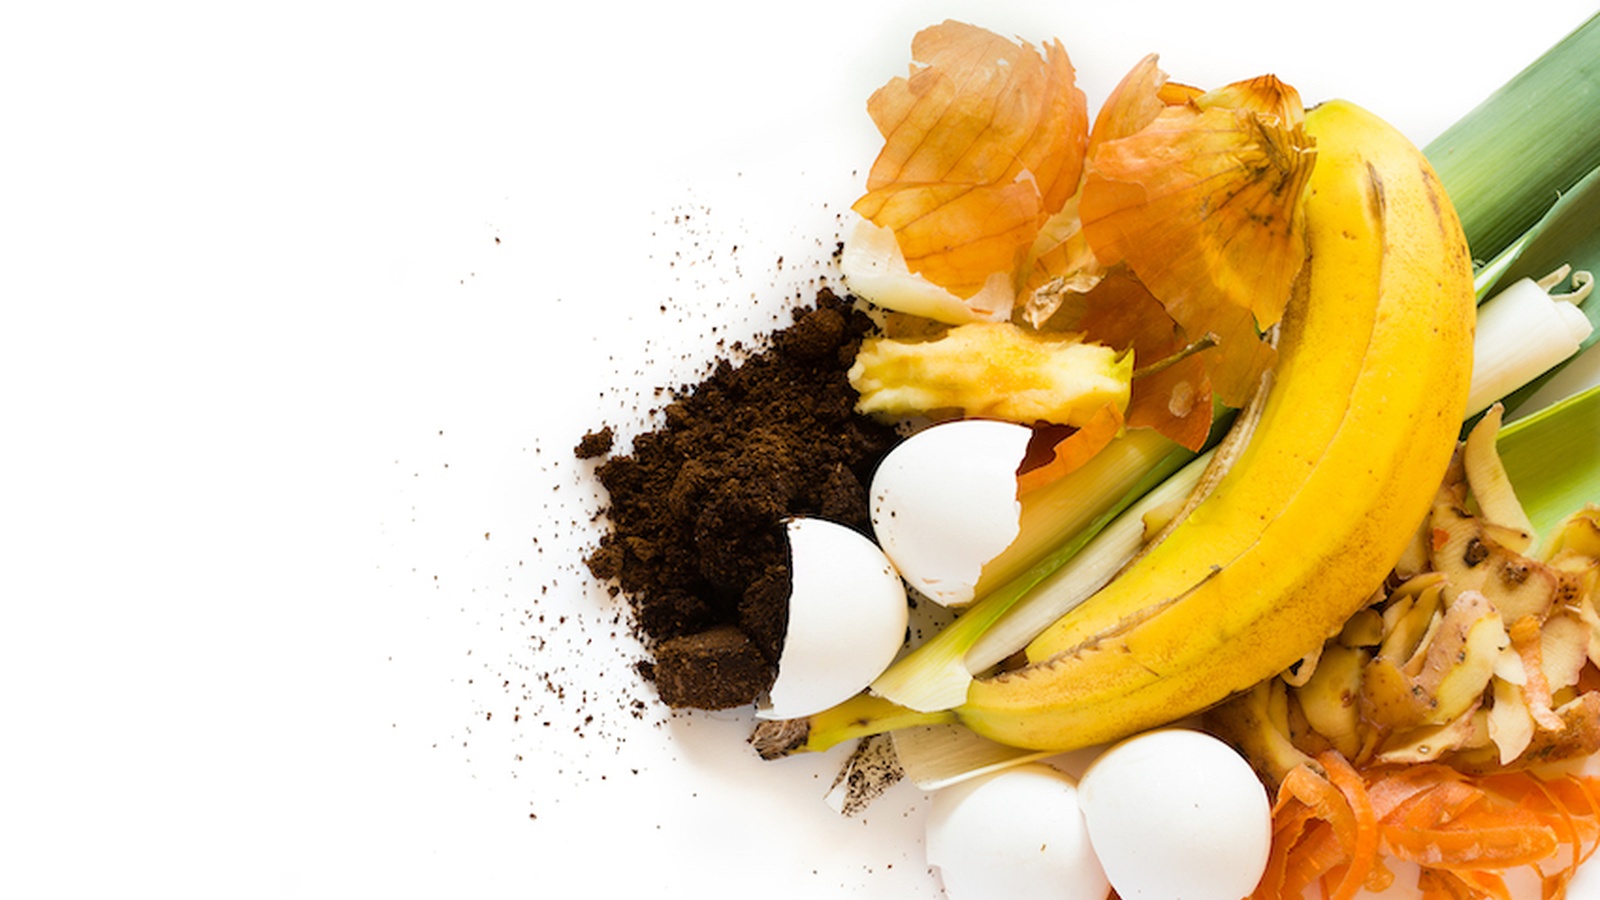 The Case For Composting